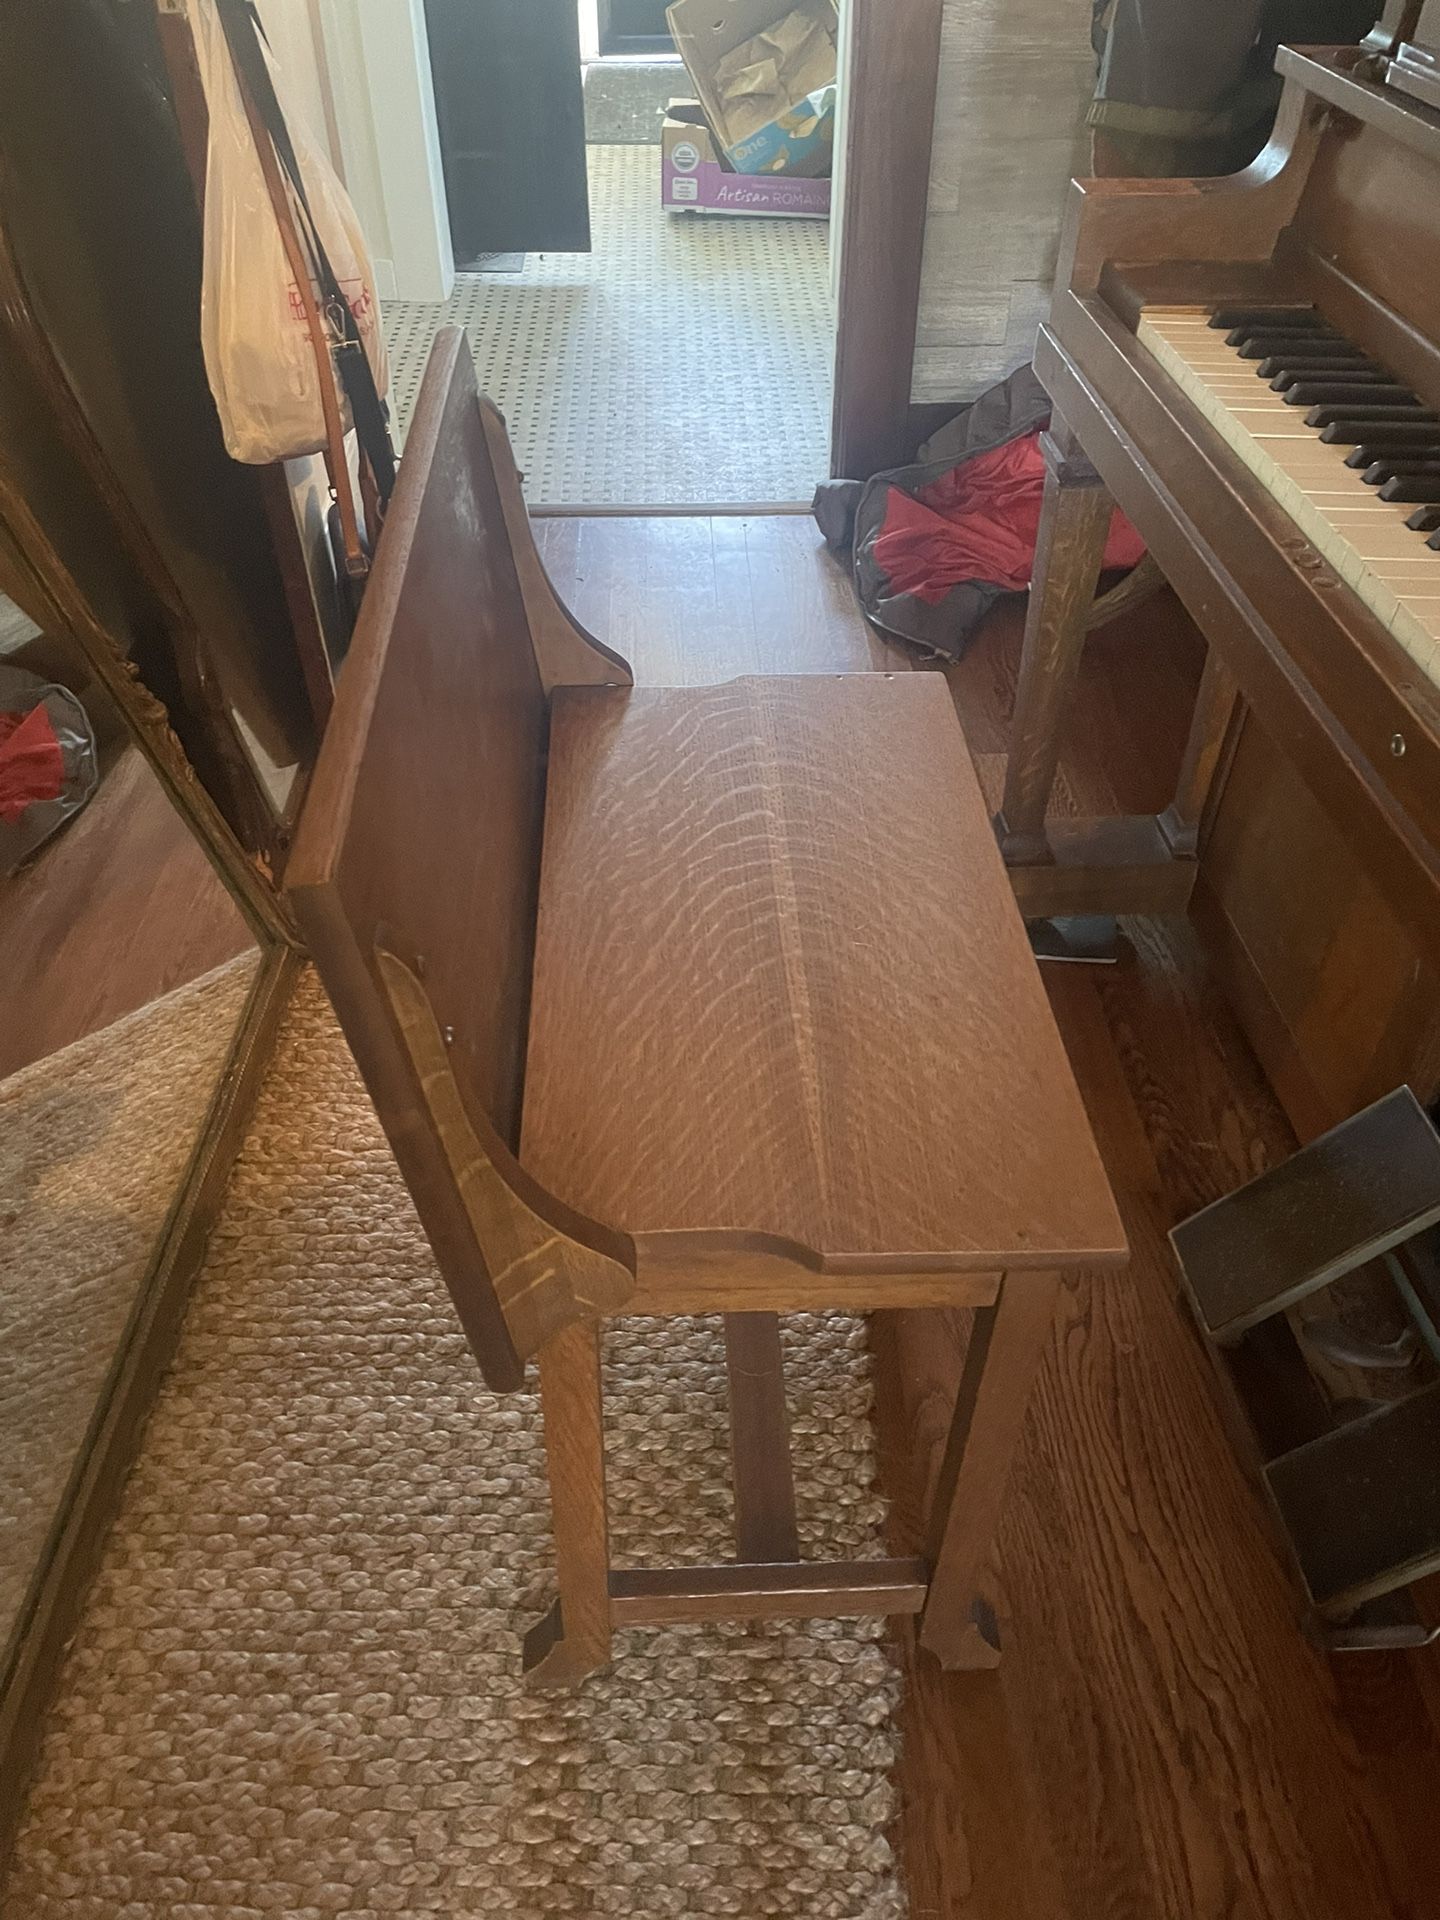 Hamilton Manuela Upright 1920’s Player piano With Bench Seat